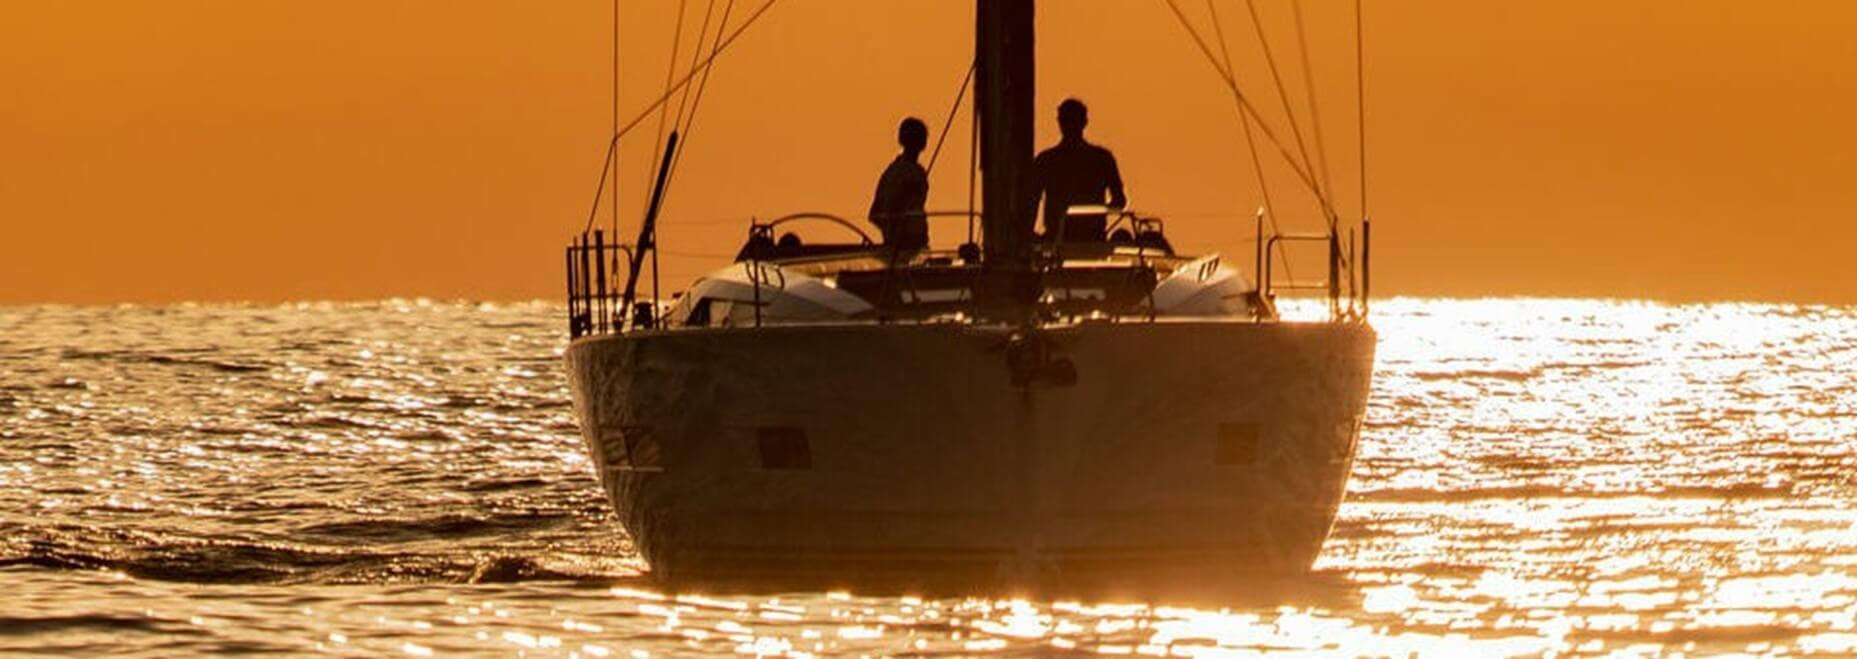 Hanse 460 sailing yacht on the water with an orange horizon